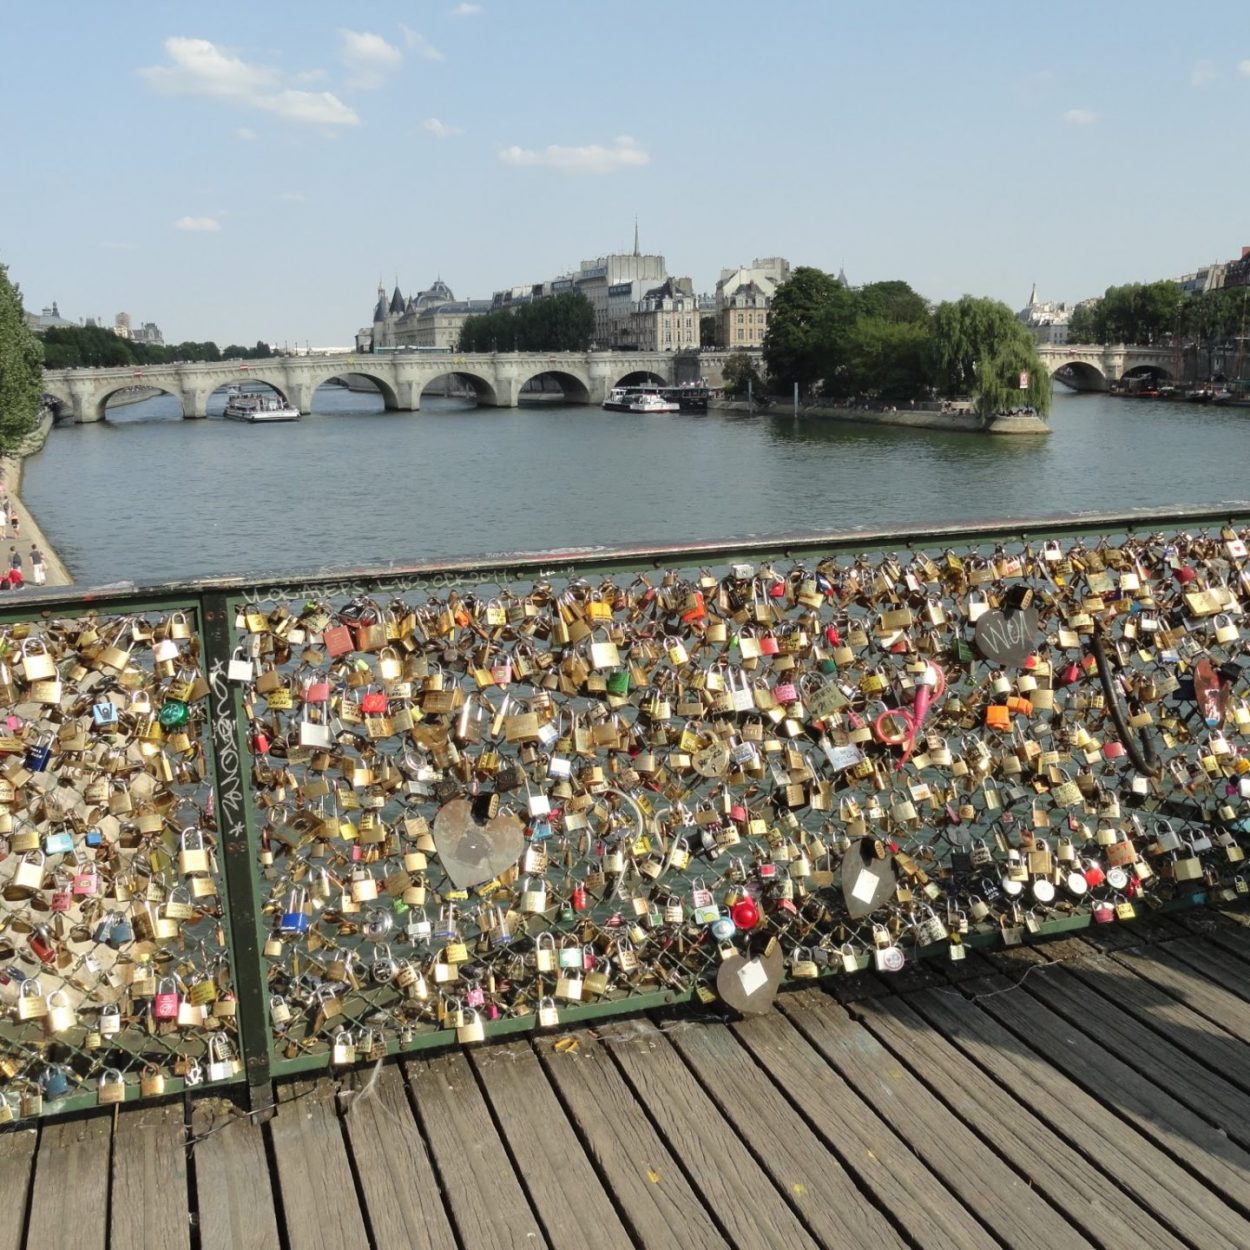 The Pont des Arts, a pedestrian bridge on the river Seine. Visitors attach padlocks to its railing and throw the keys into the Seine as a gesture of love.